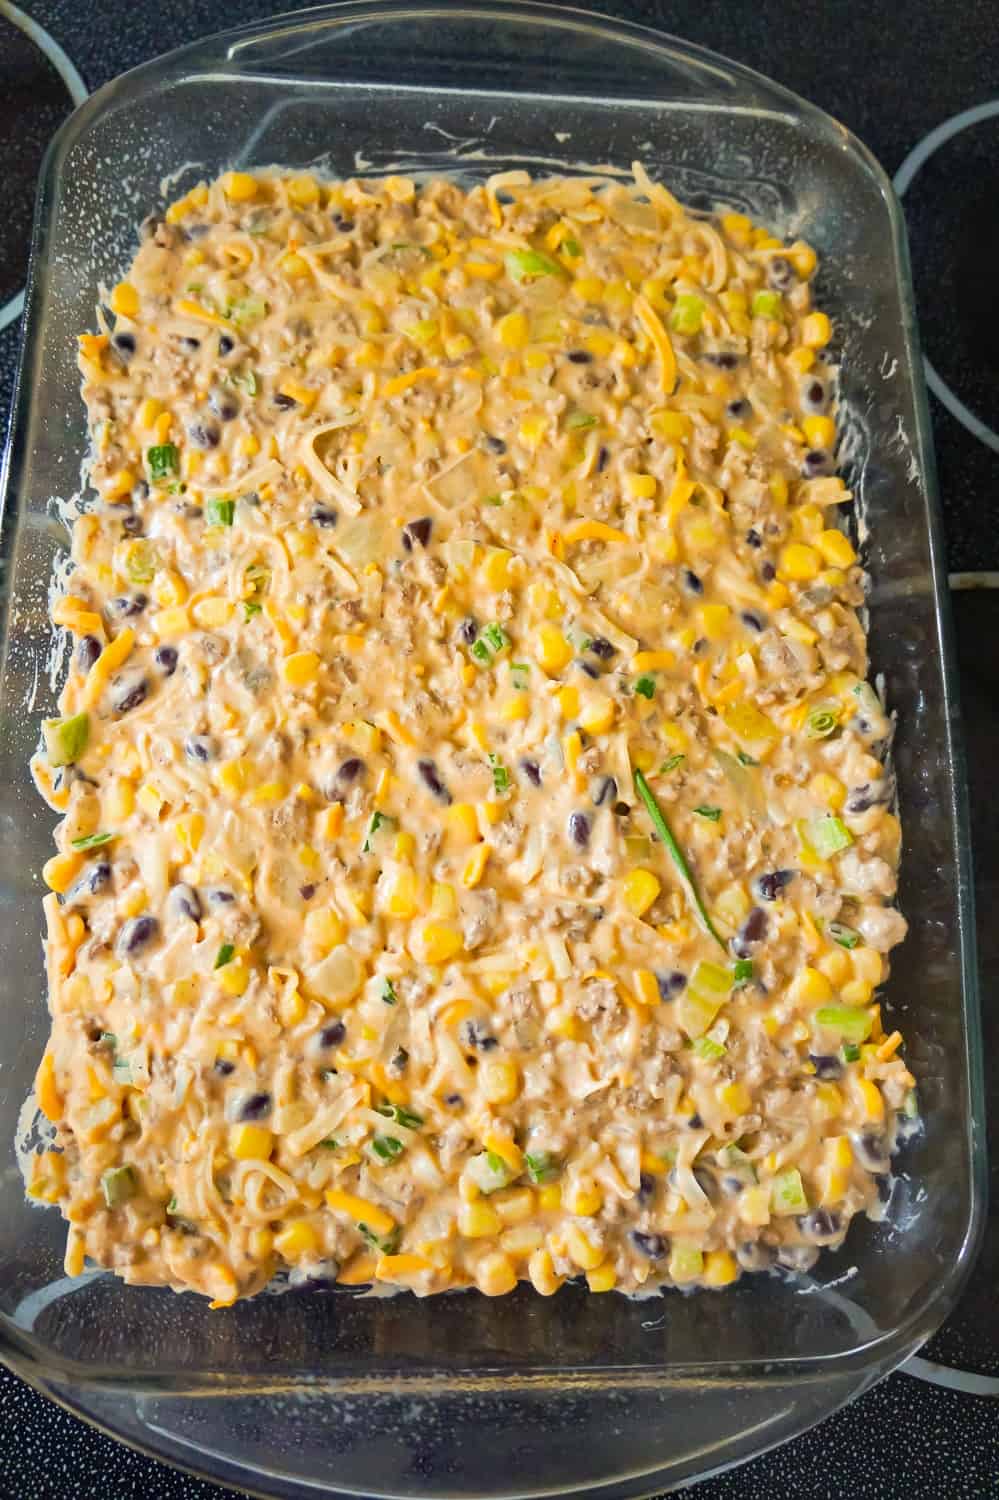 ground beef mixture with corn and black beans pressed into a 9 x 13 inch baking dish